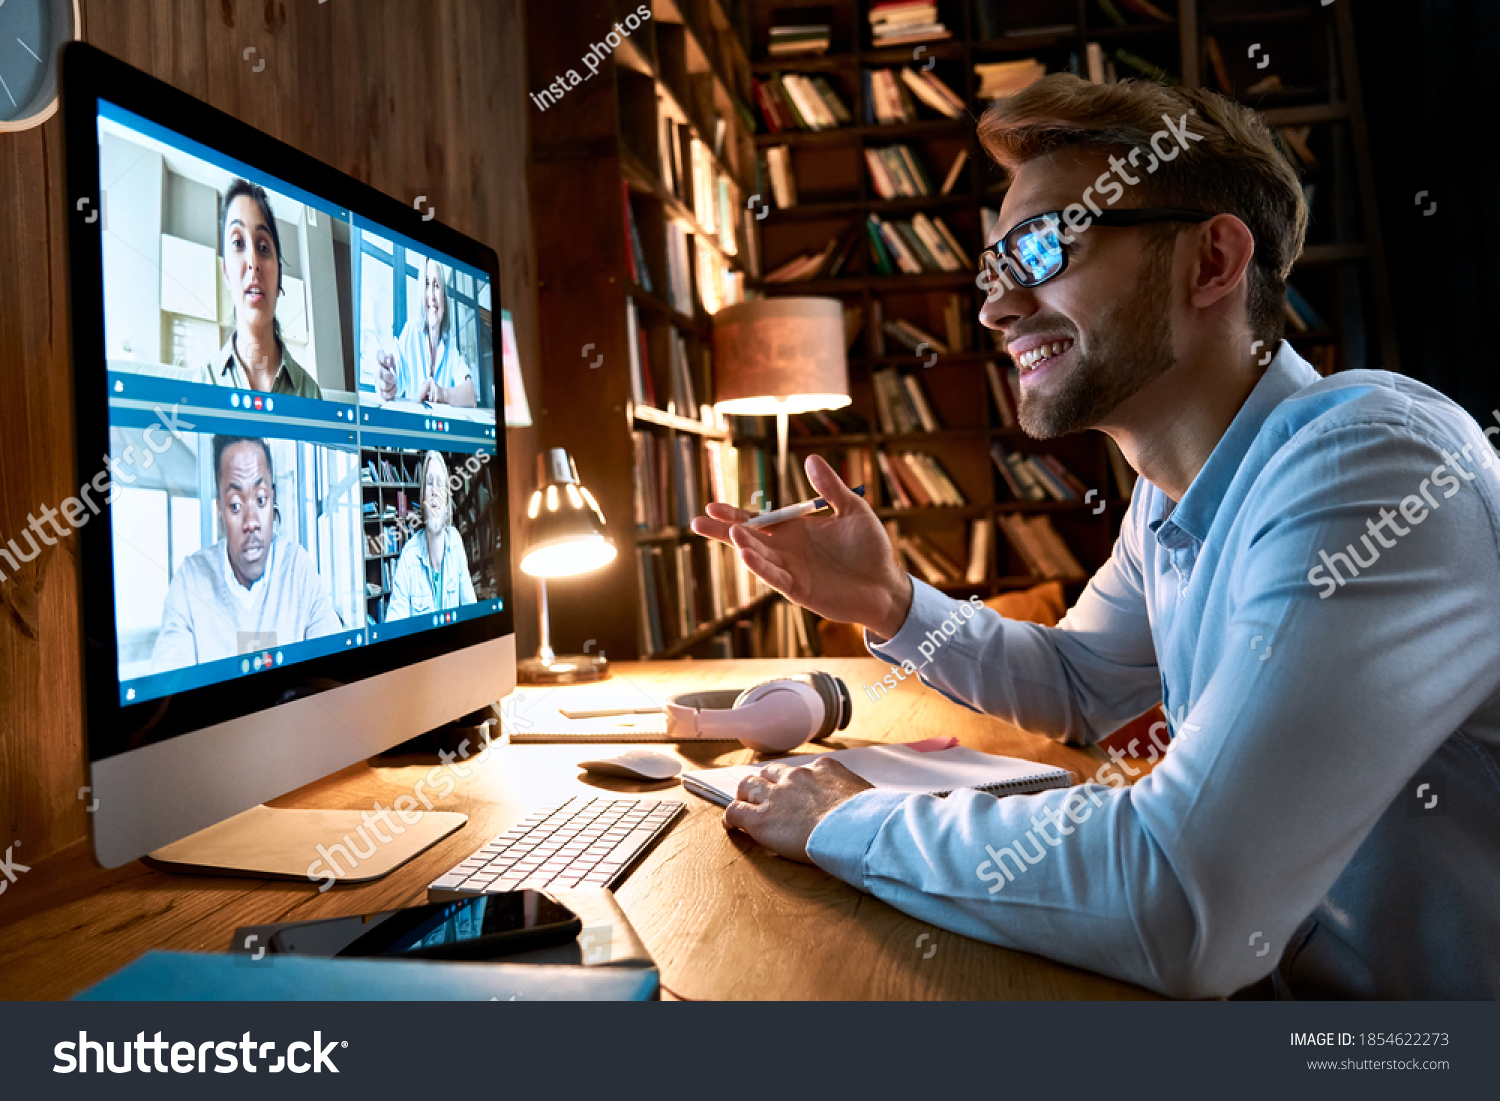 Business man having virtual team meeting on video conference call using computer. Social distance worker working from home office talking to diverse colleagues in remote videoconference online chat. #1854622273